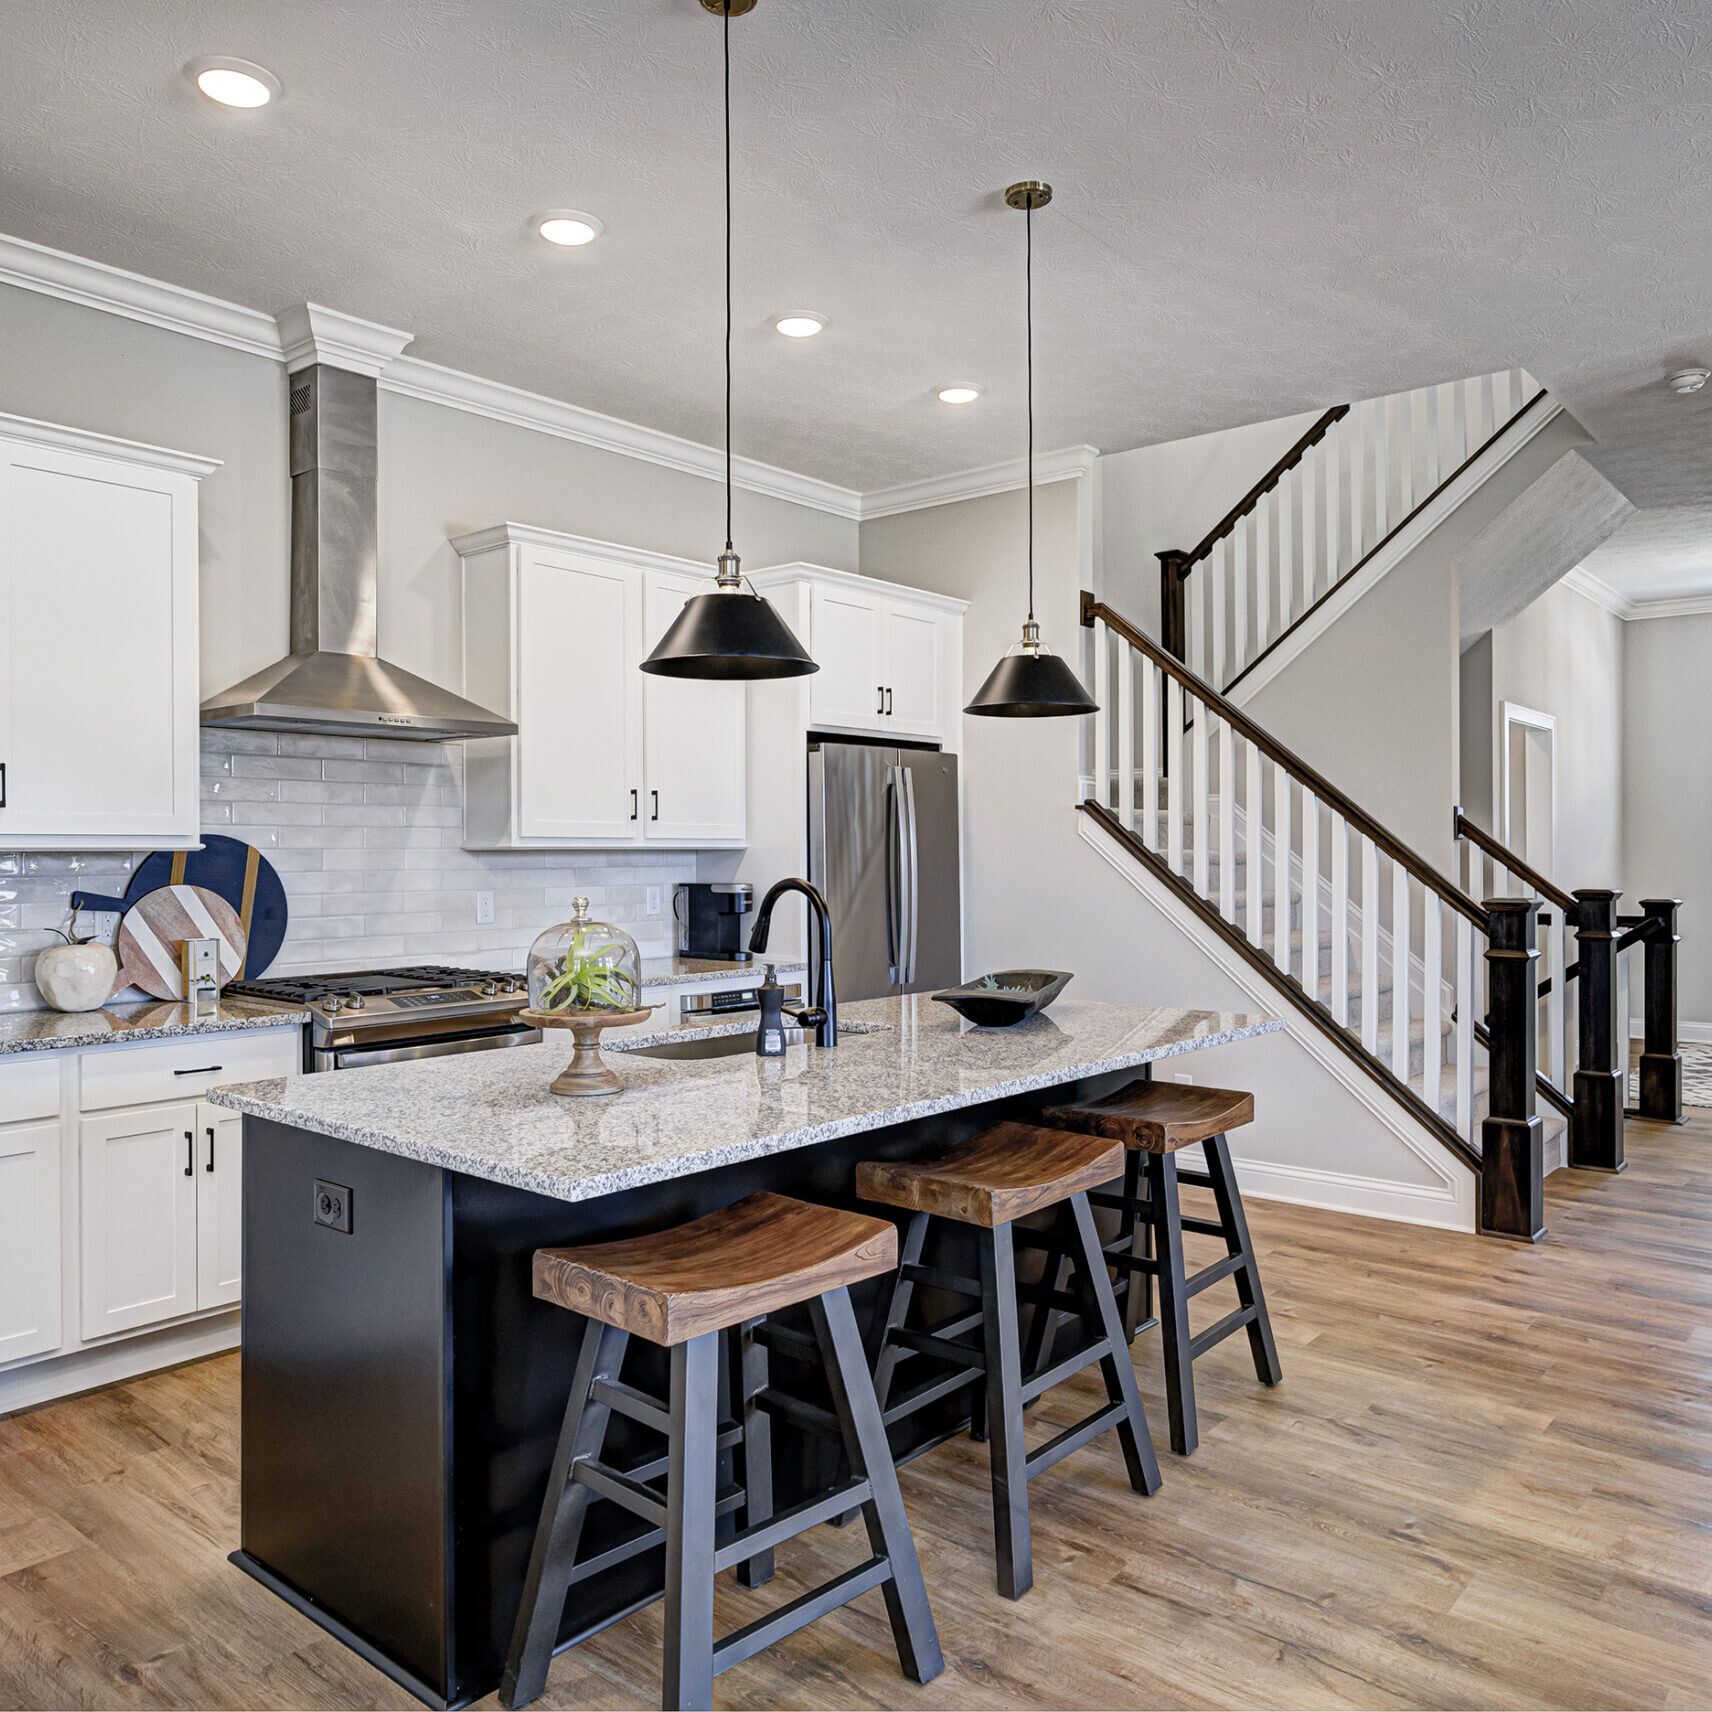 A Custom Home Builder Carmel Indiana with a kitchen featuring hardwood floors and a stairway.